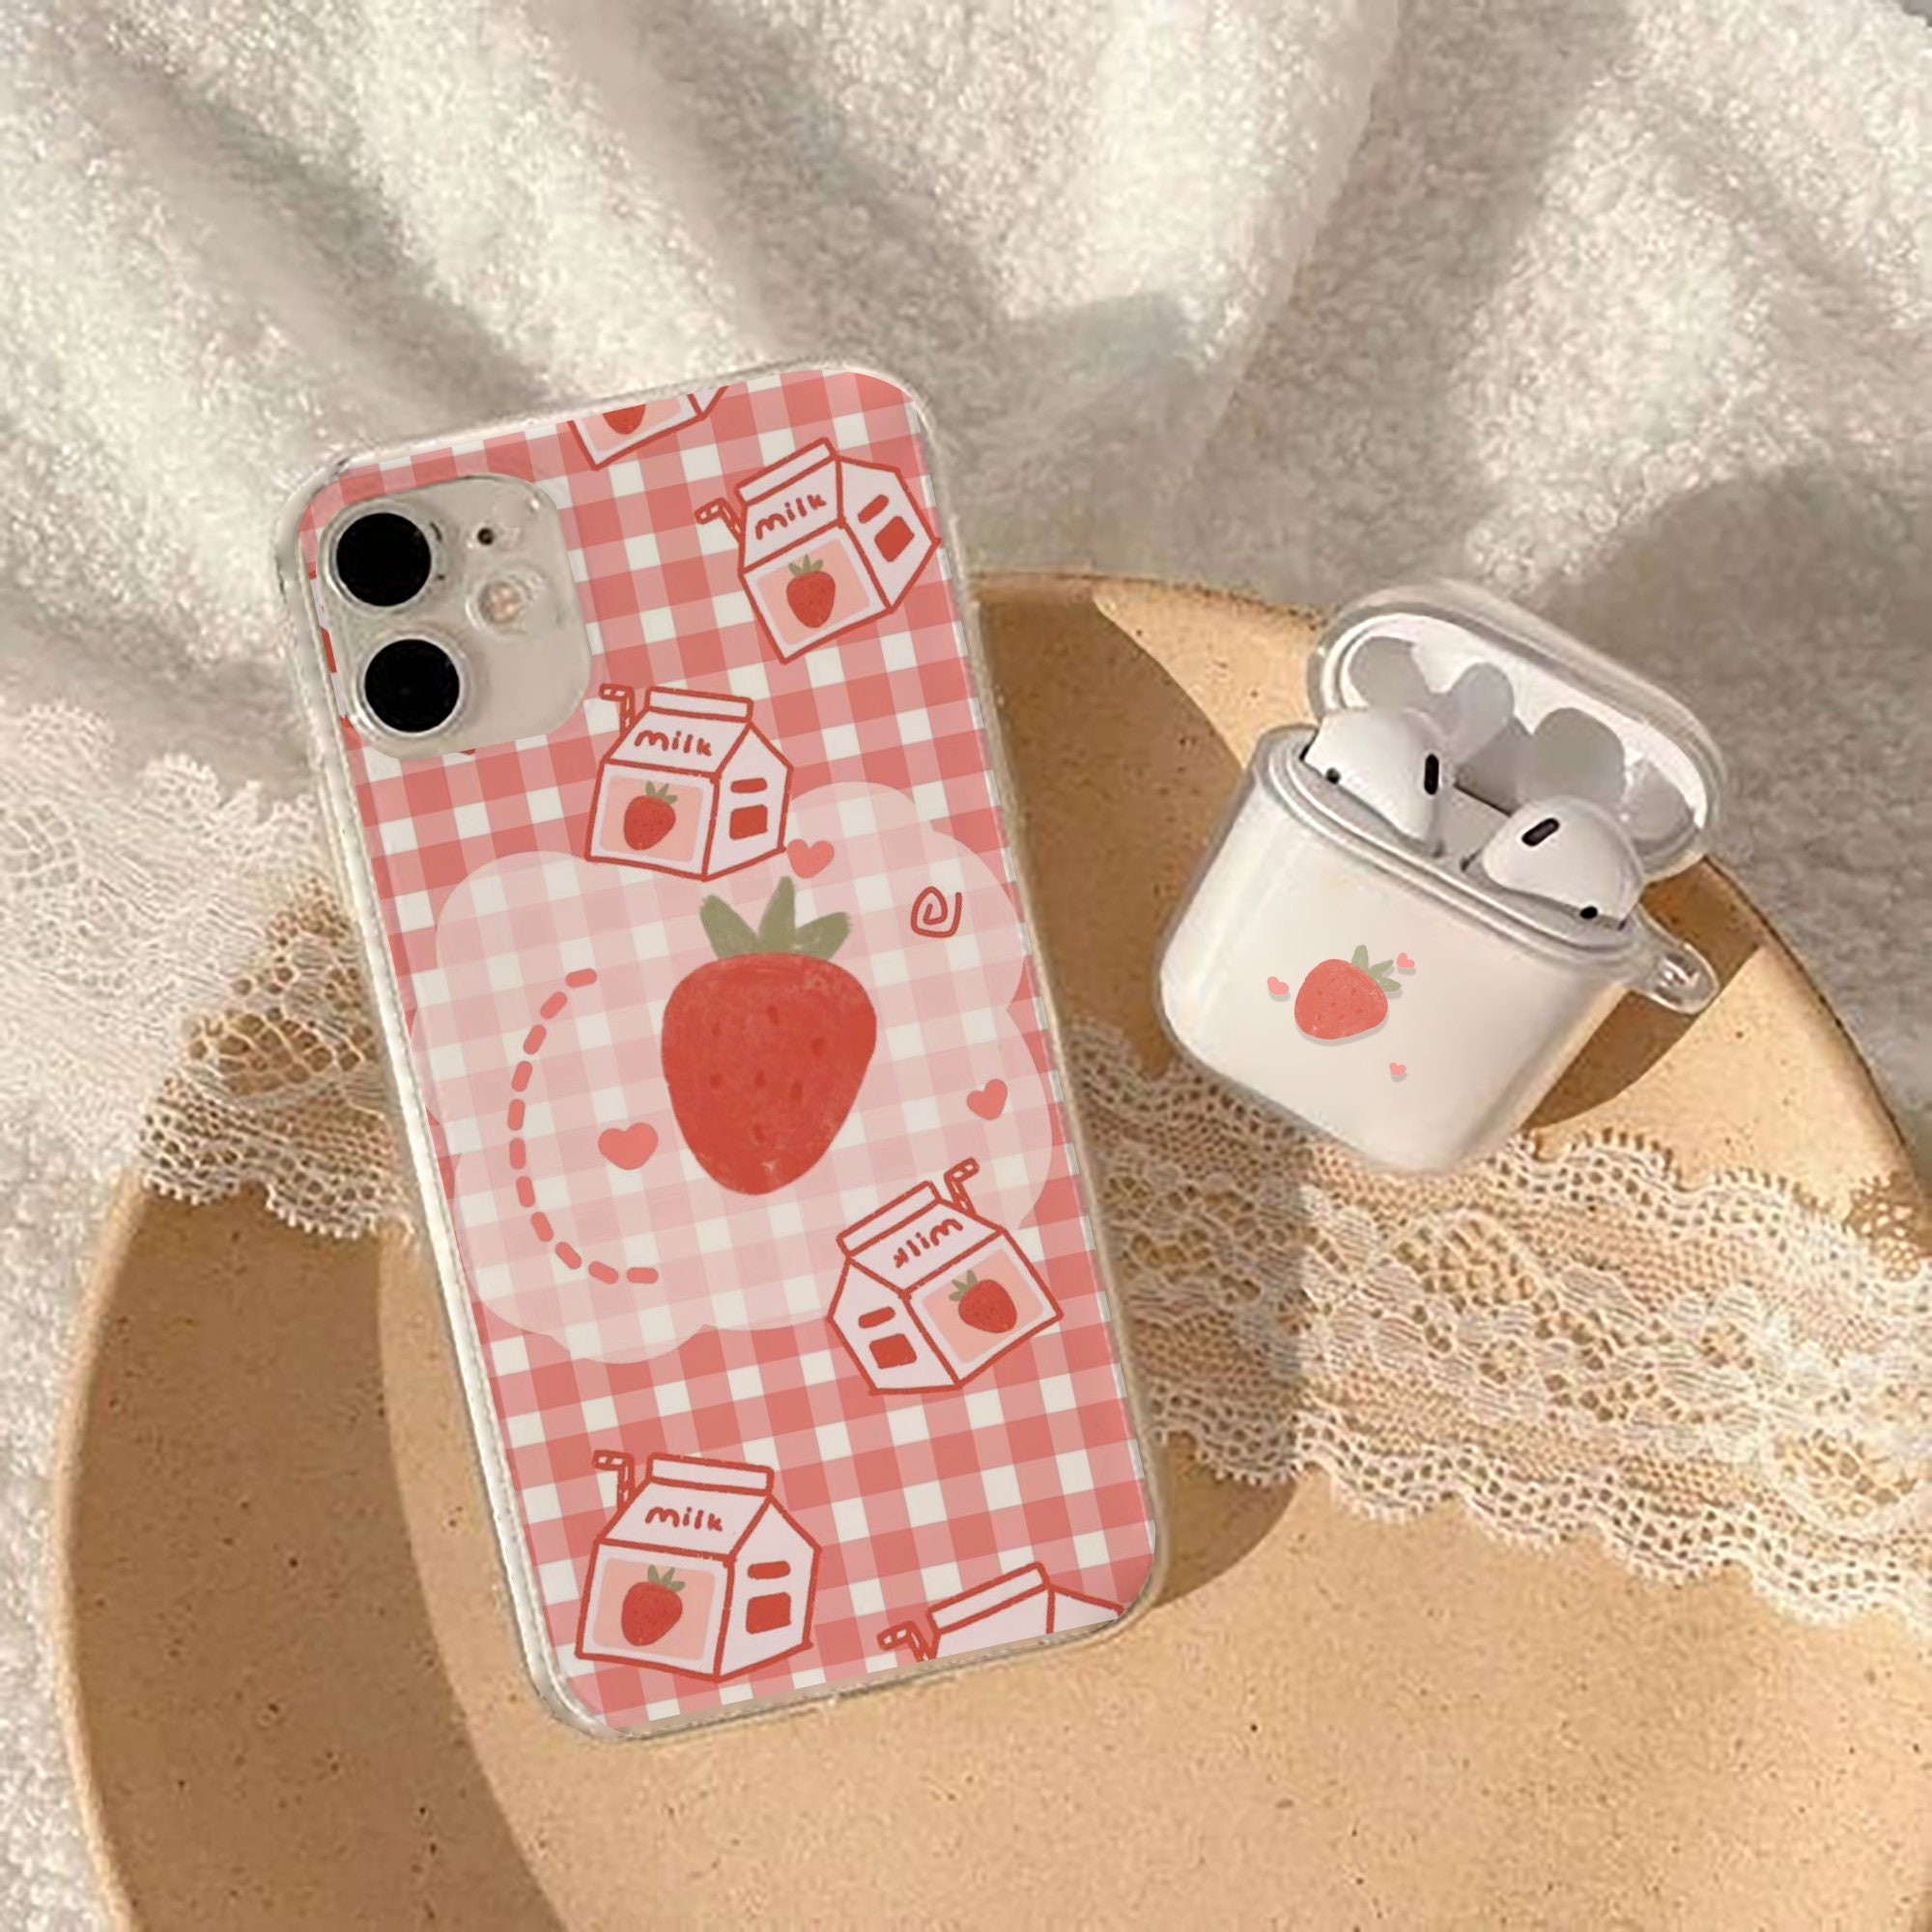 1pc cute cartoon airpods case, Pink heart with cute cat pattern case,  luxury shock proof case compatible with airpods 2nd gen/3rd/pro/pro 2nd.  black cute earbuds case for Airpods.